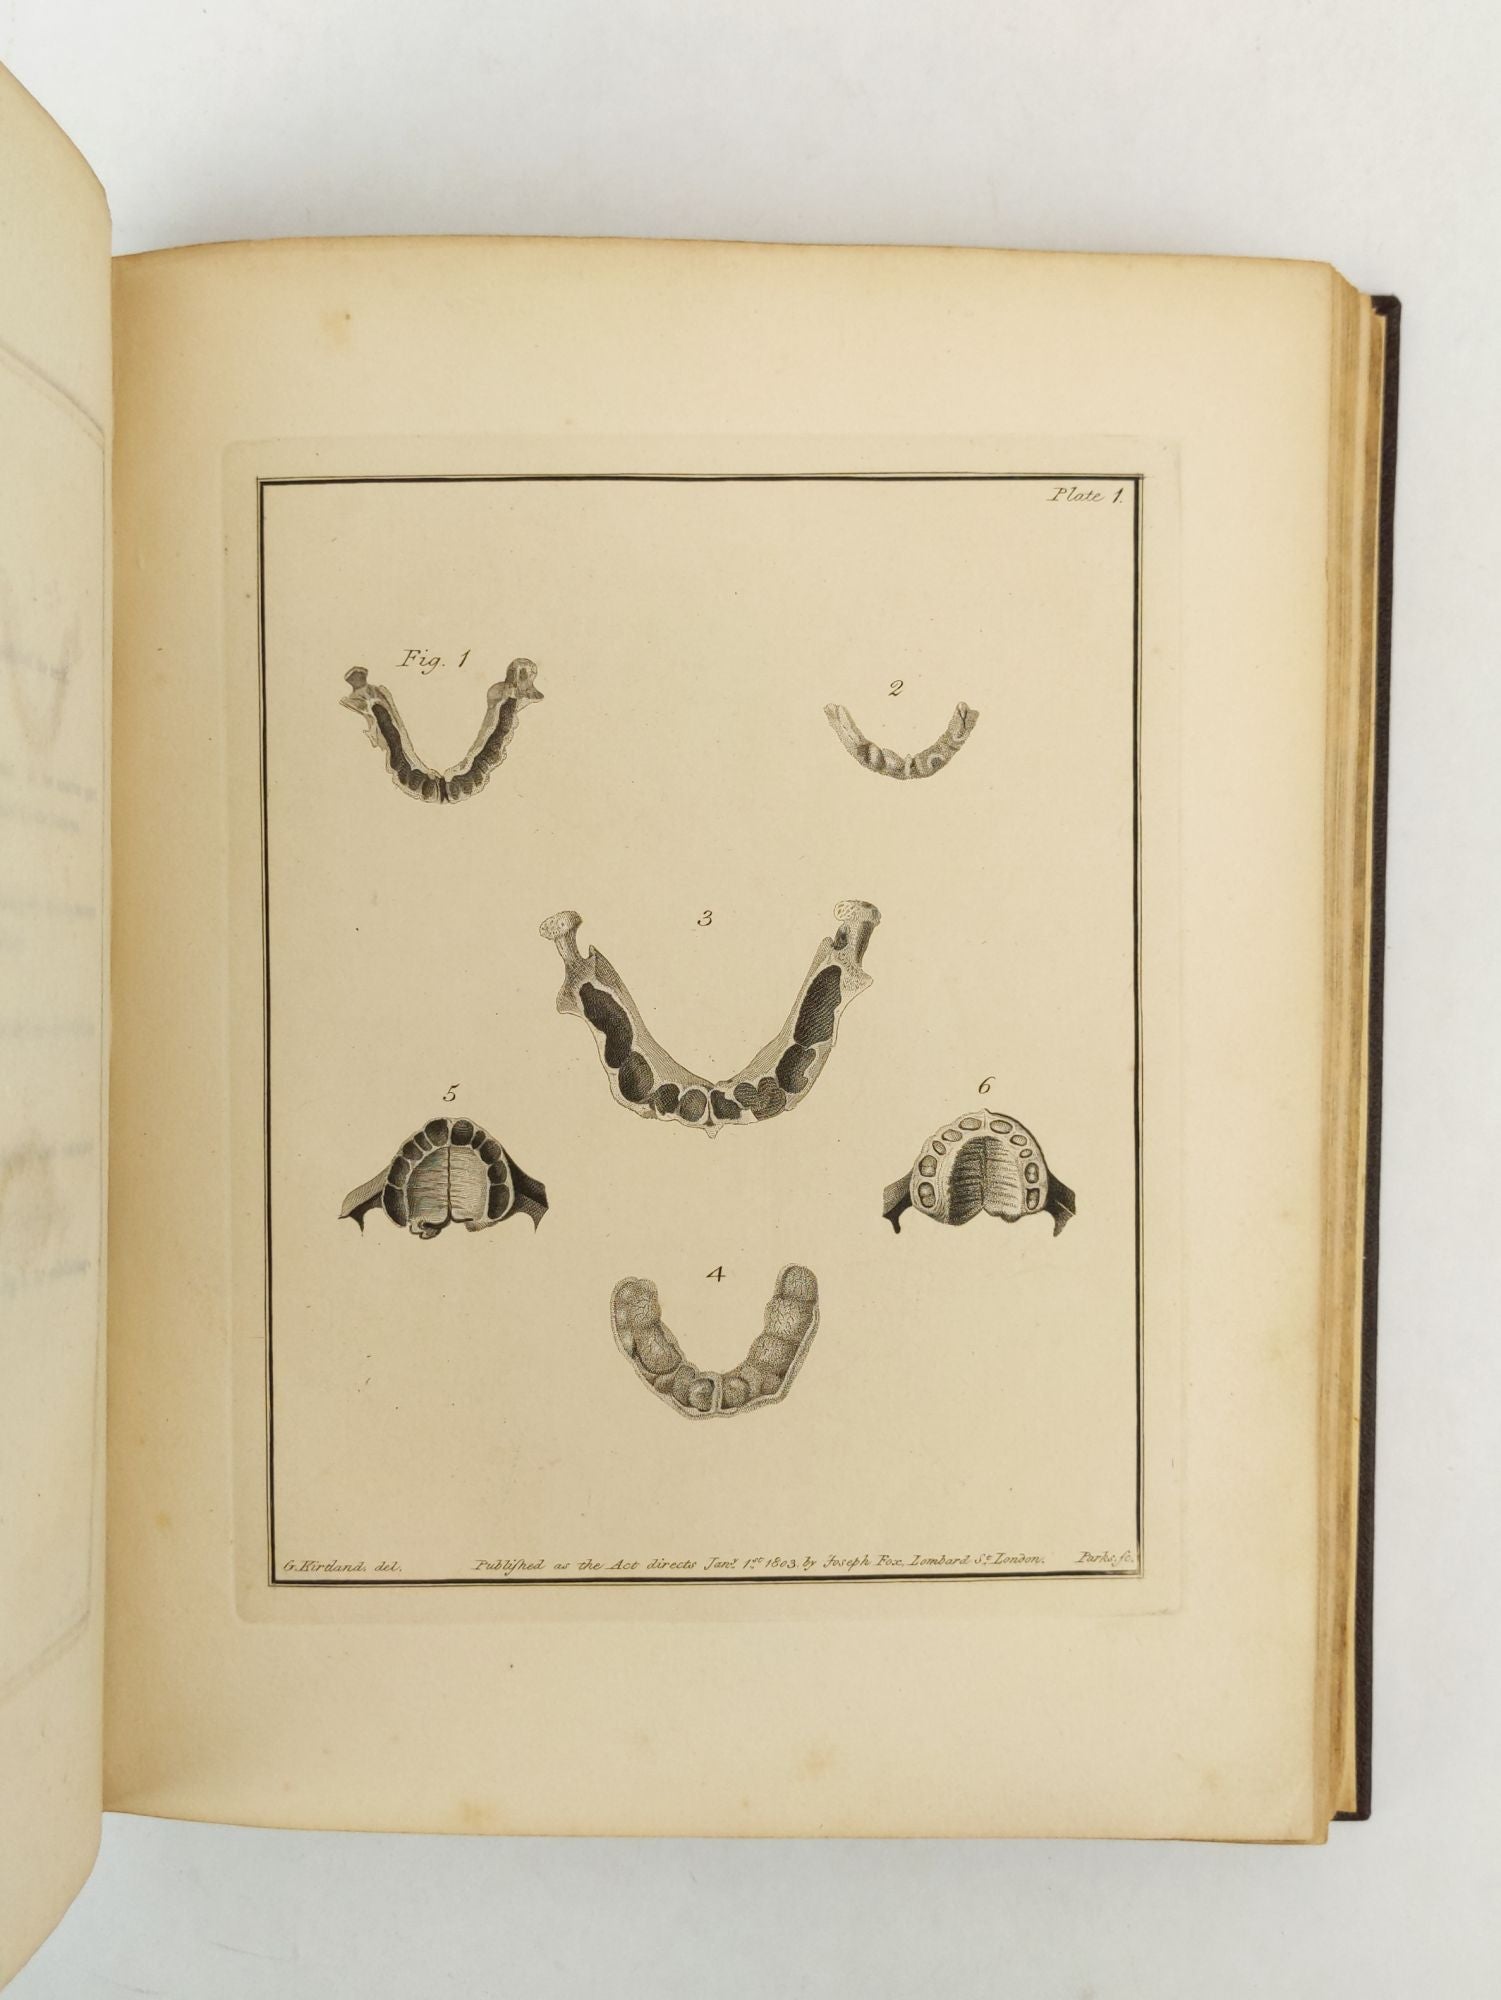 Product Image for THE NATURAL HISTORY OF THE HUMAN TEETH, INCLUDING A PARTICULAR ELUCIDATION OF THE CHANGES WHICH TAKE PLACE DURING THE SECOND DENTITION [...]; [Bound with] THE HISTORY AND TREATMENT OF THE DISEASES OF THE TEETH, THE GUMS, AND THE ALVEOLAR PROCESSES, WITH T